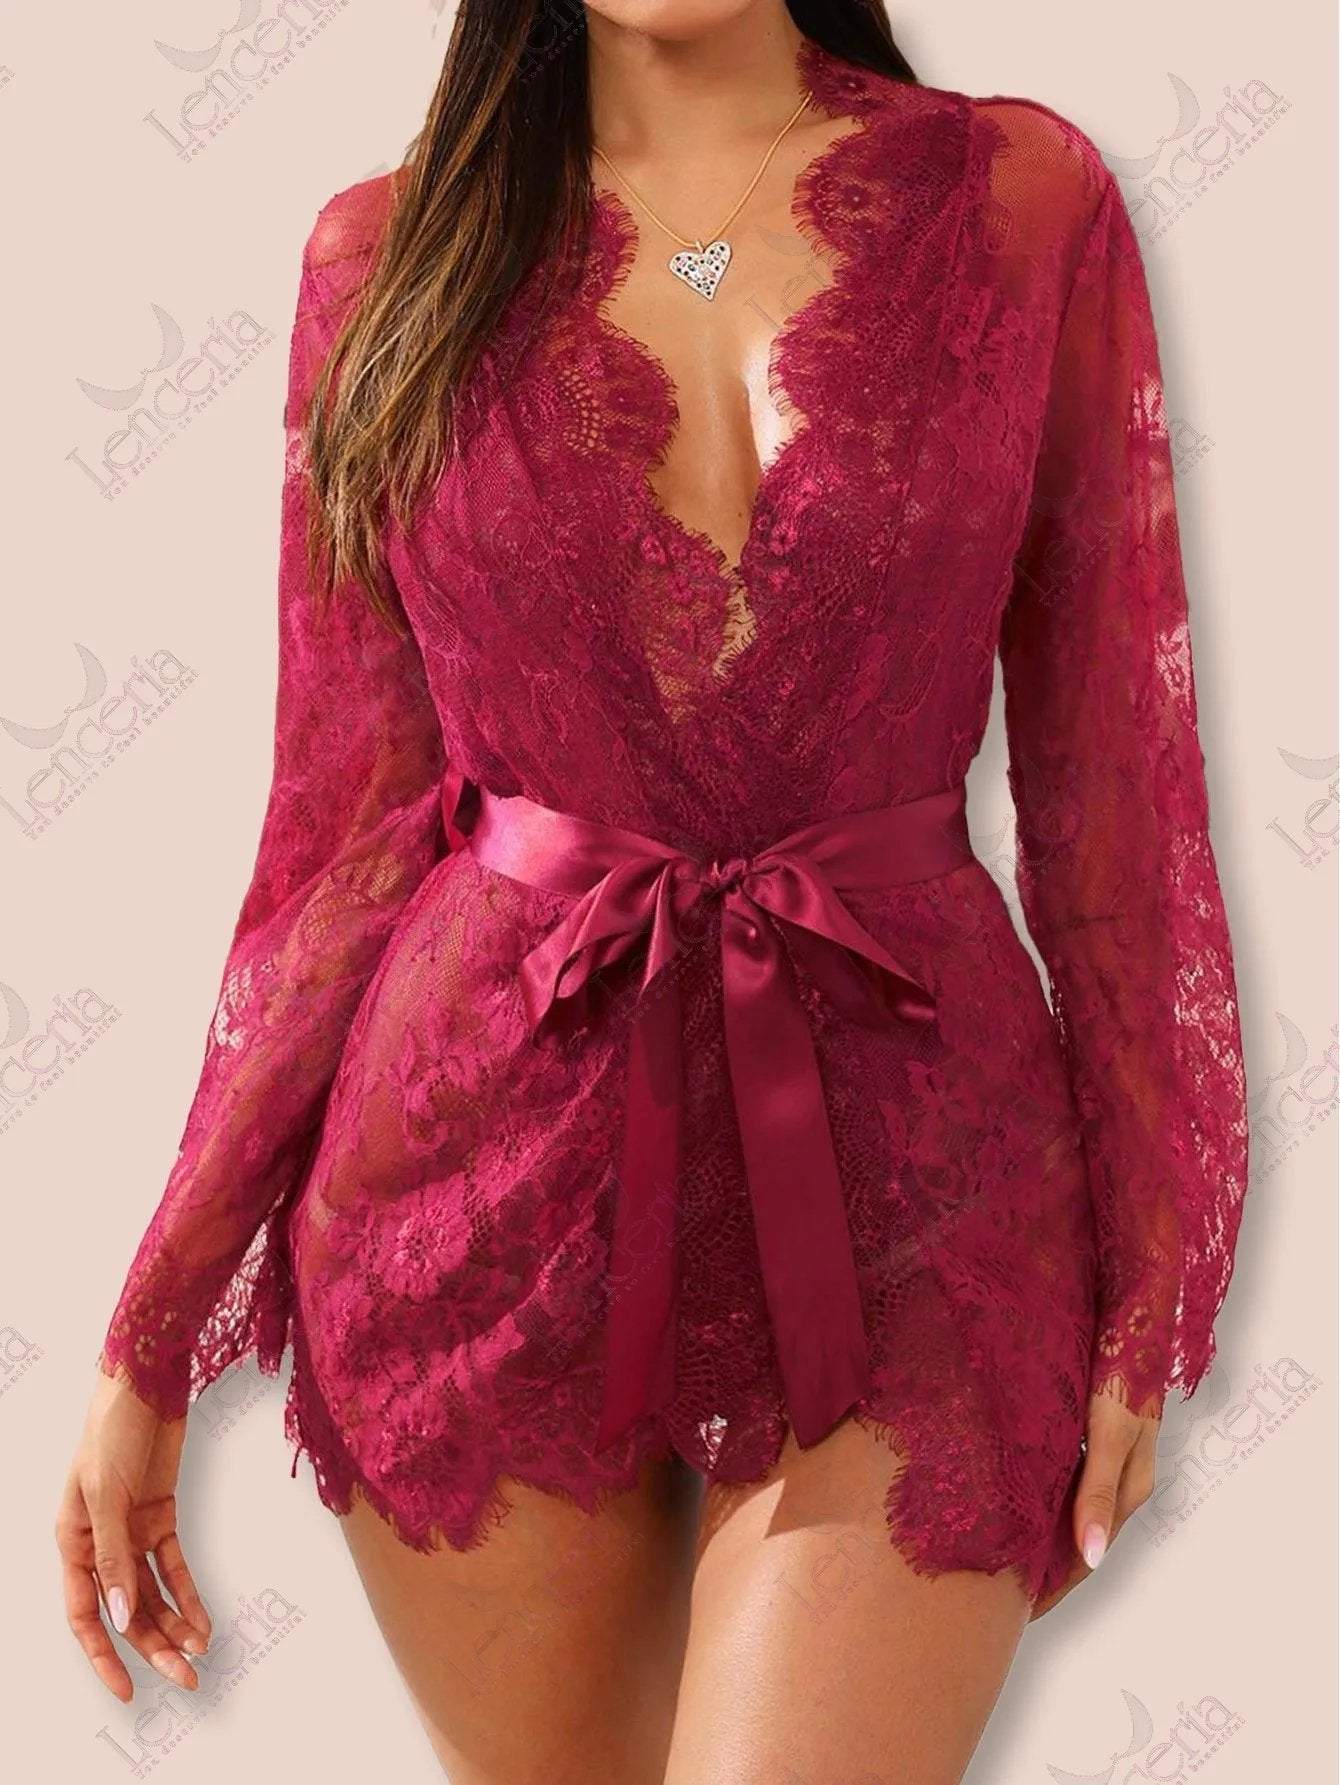 Mariee Bridal lace robe and teddy suit set (3 piece) - extremely stunning (m1)